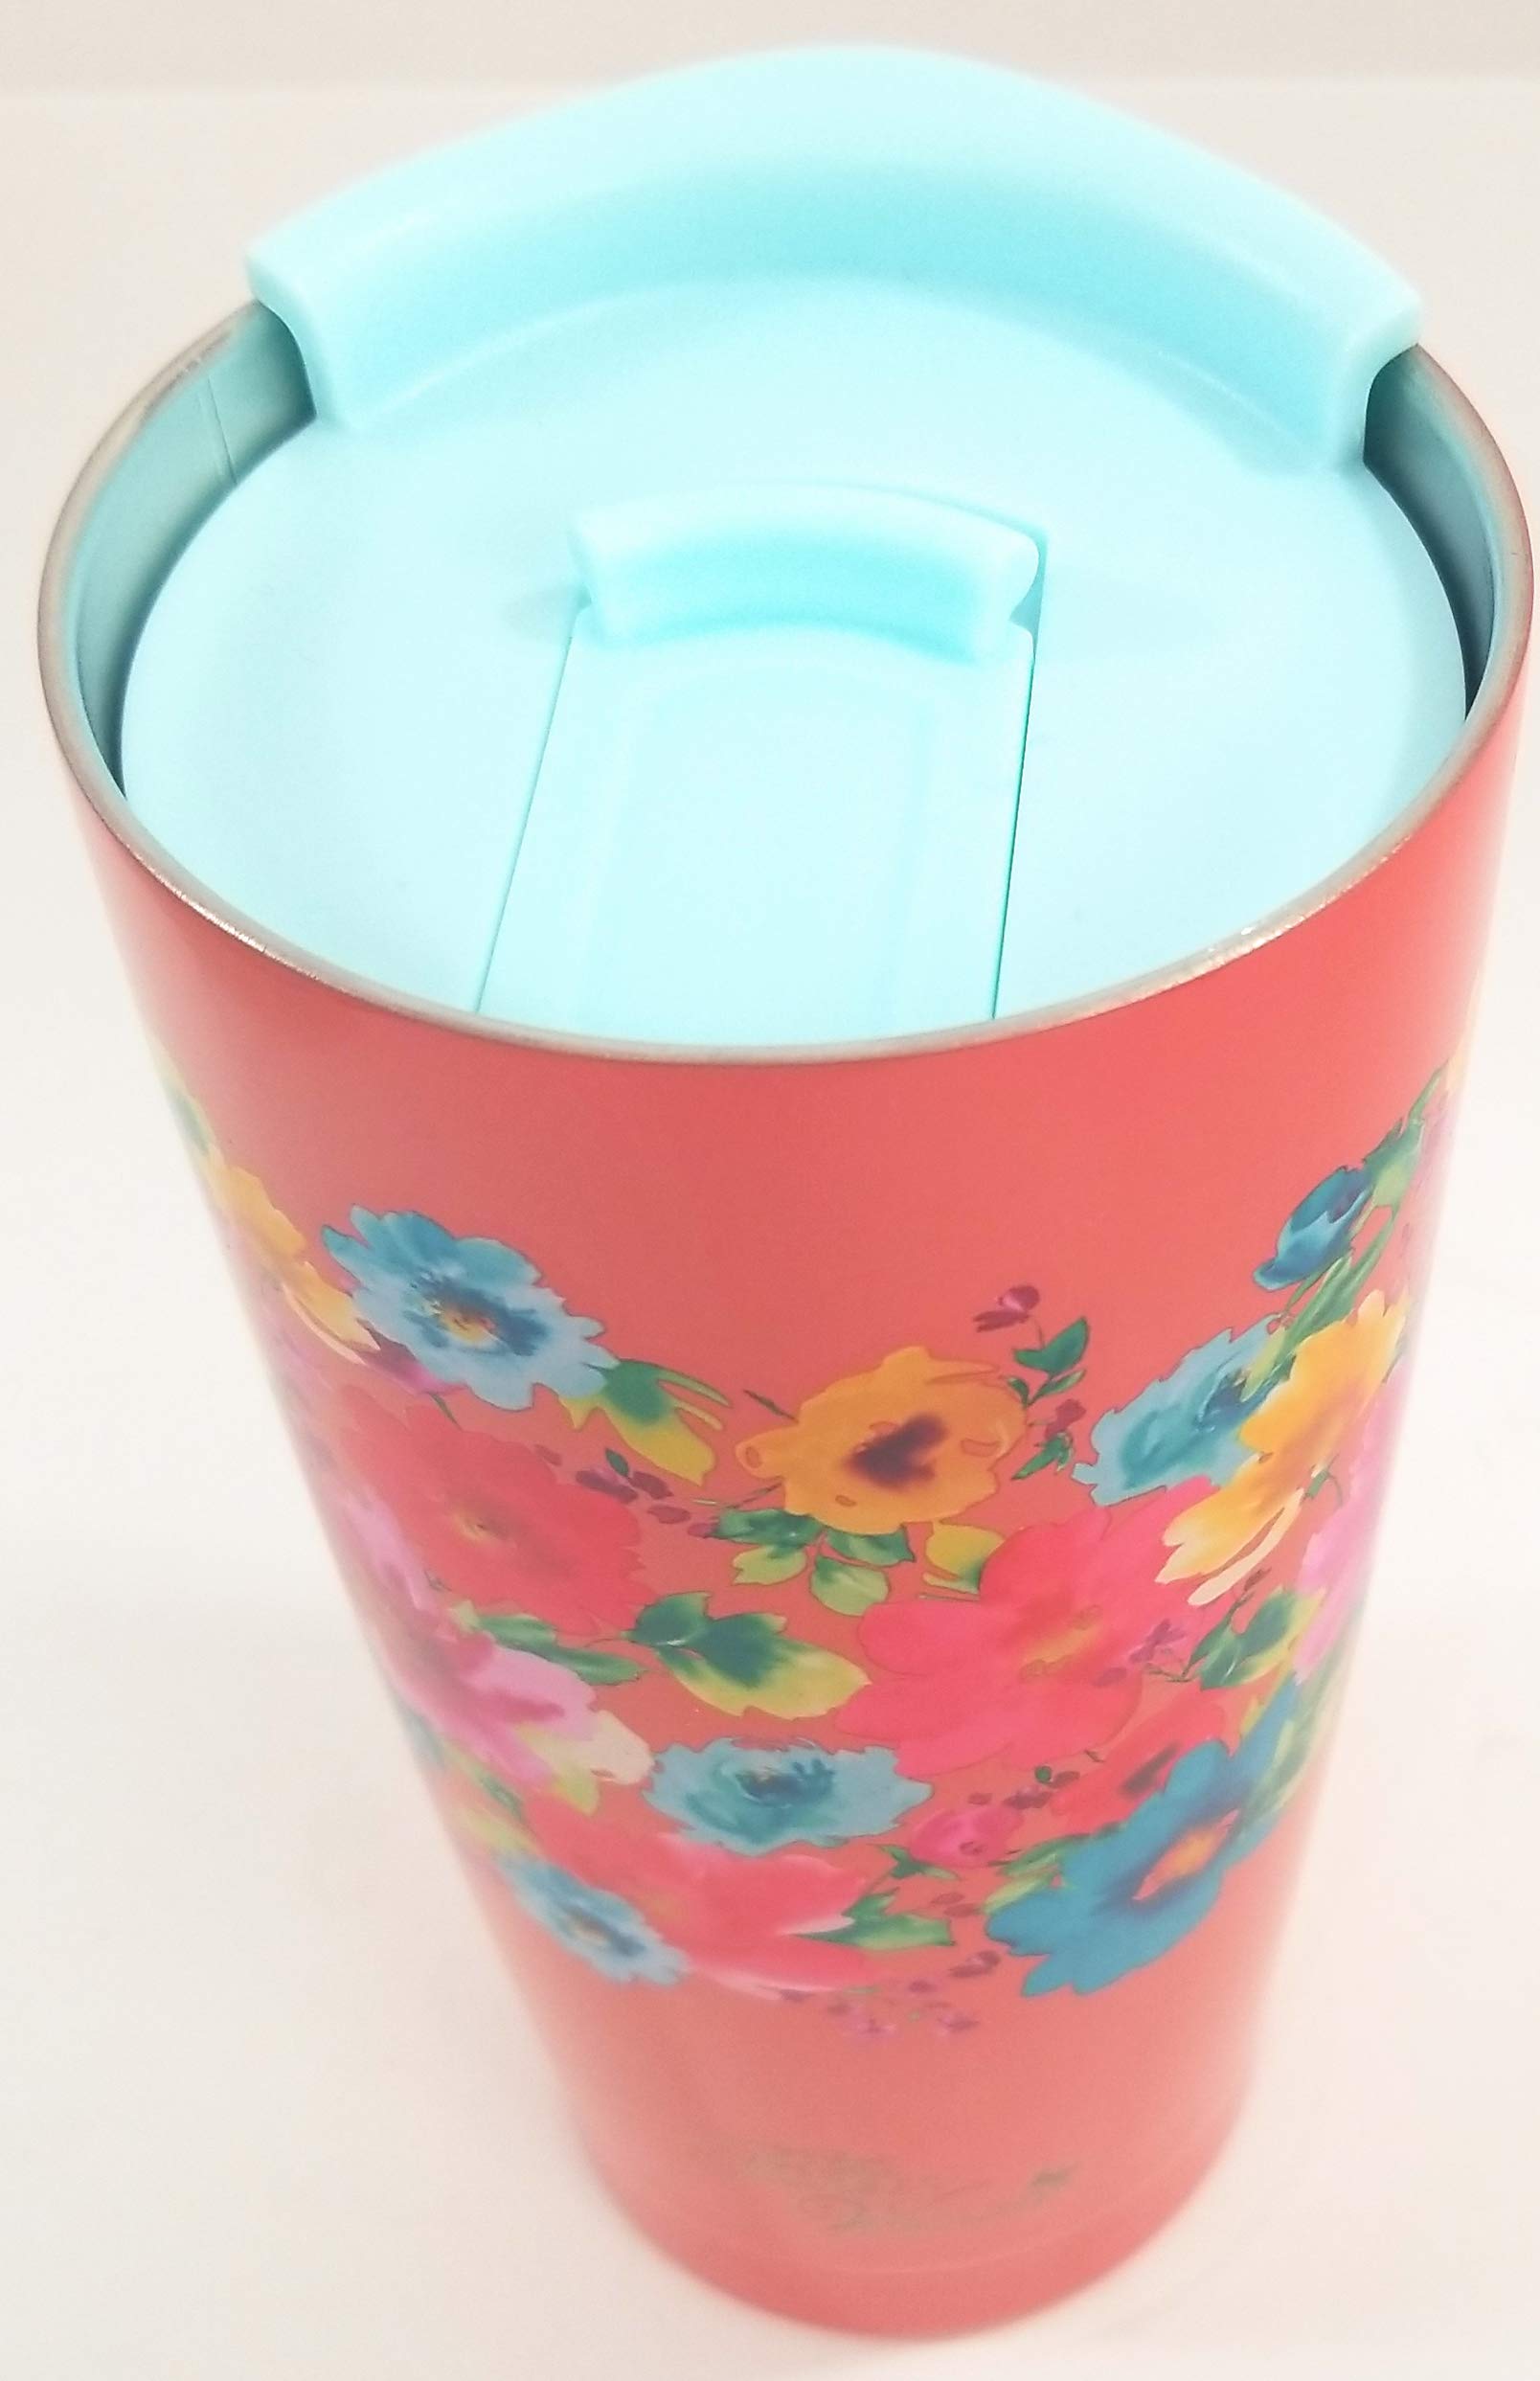 Roaprobe The Pioneer Woman Breezy Bouquet Stainless Steel Double Wall Vacuum Insulated Tumbler with Sliding Lid, 20 oz, Coral with Floral